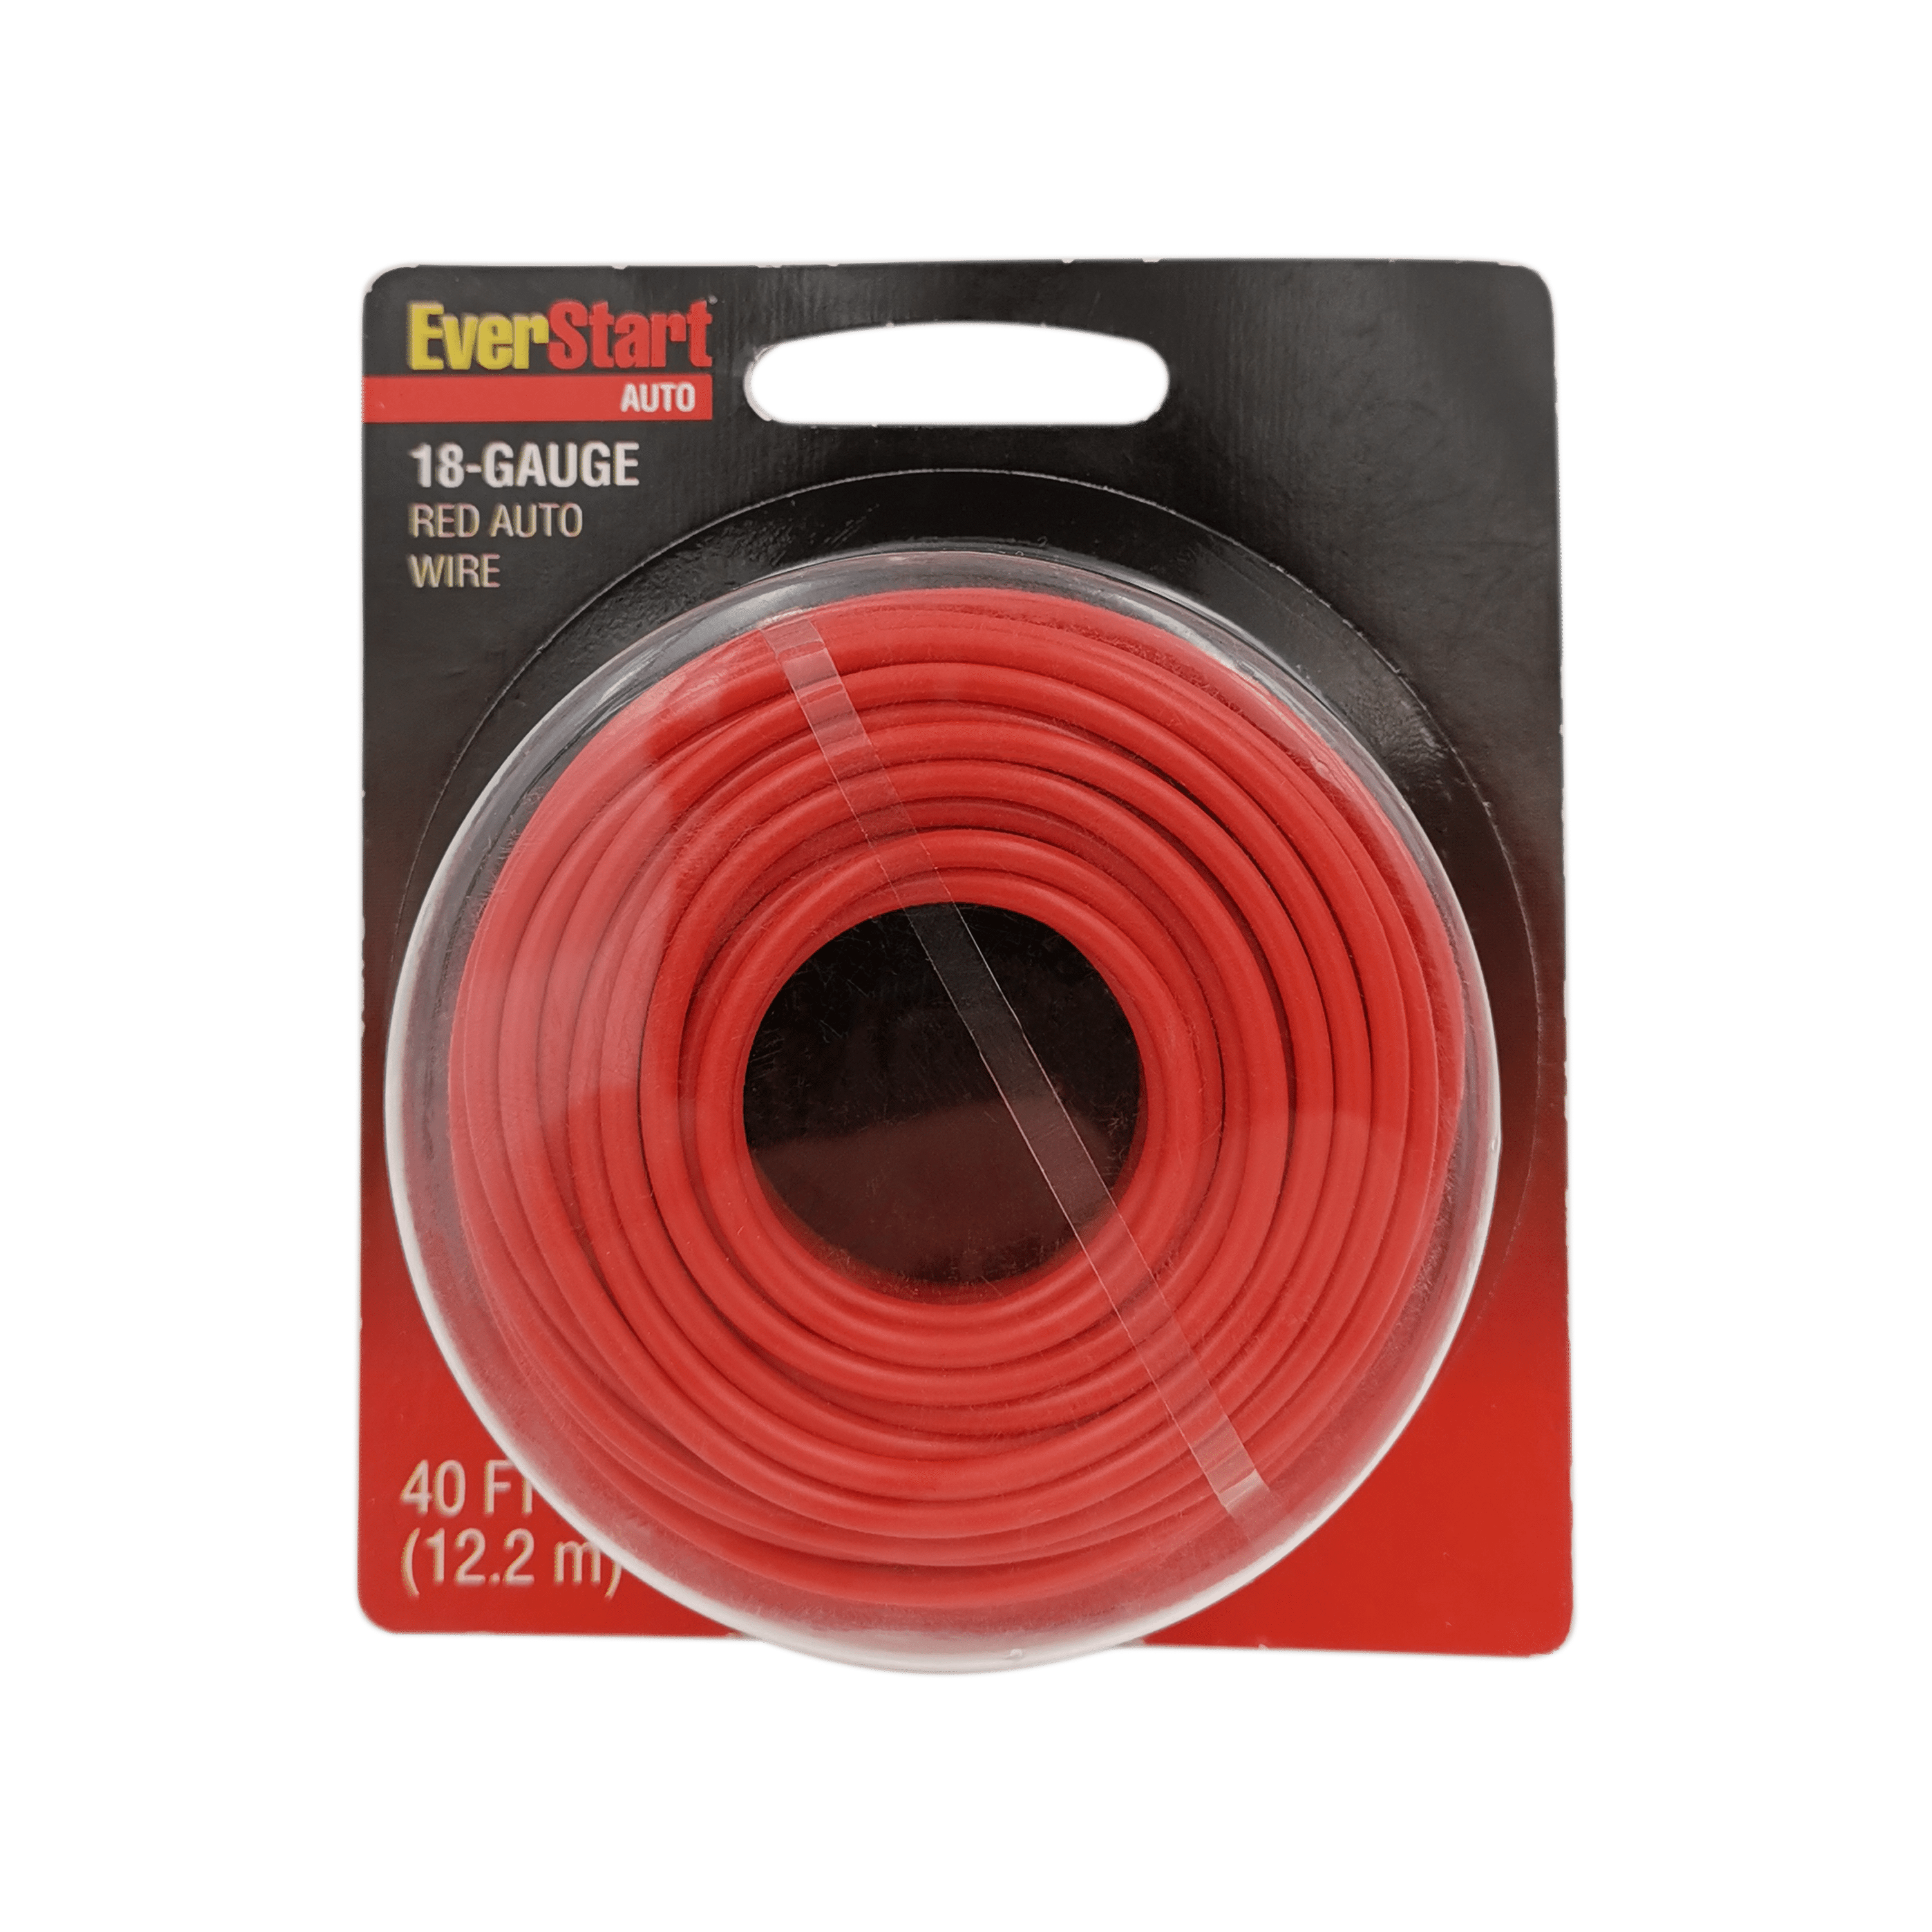 EverStart Universal 18-Gauge Auto Wire, Red Wire, 40 feet, Light Swith to Fuse Block or Relay for Car, ES17R1840